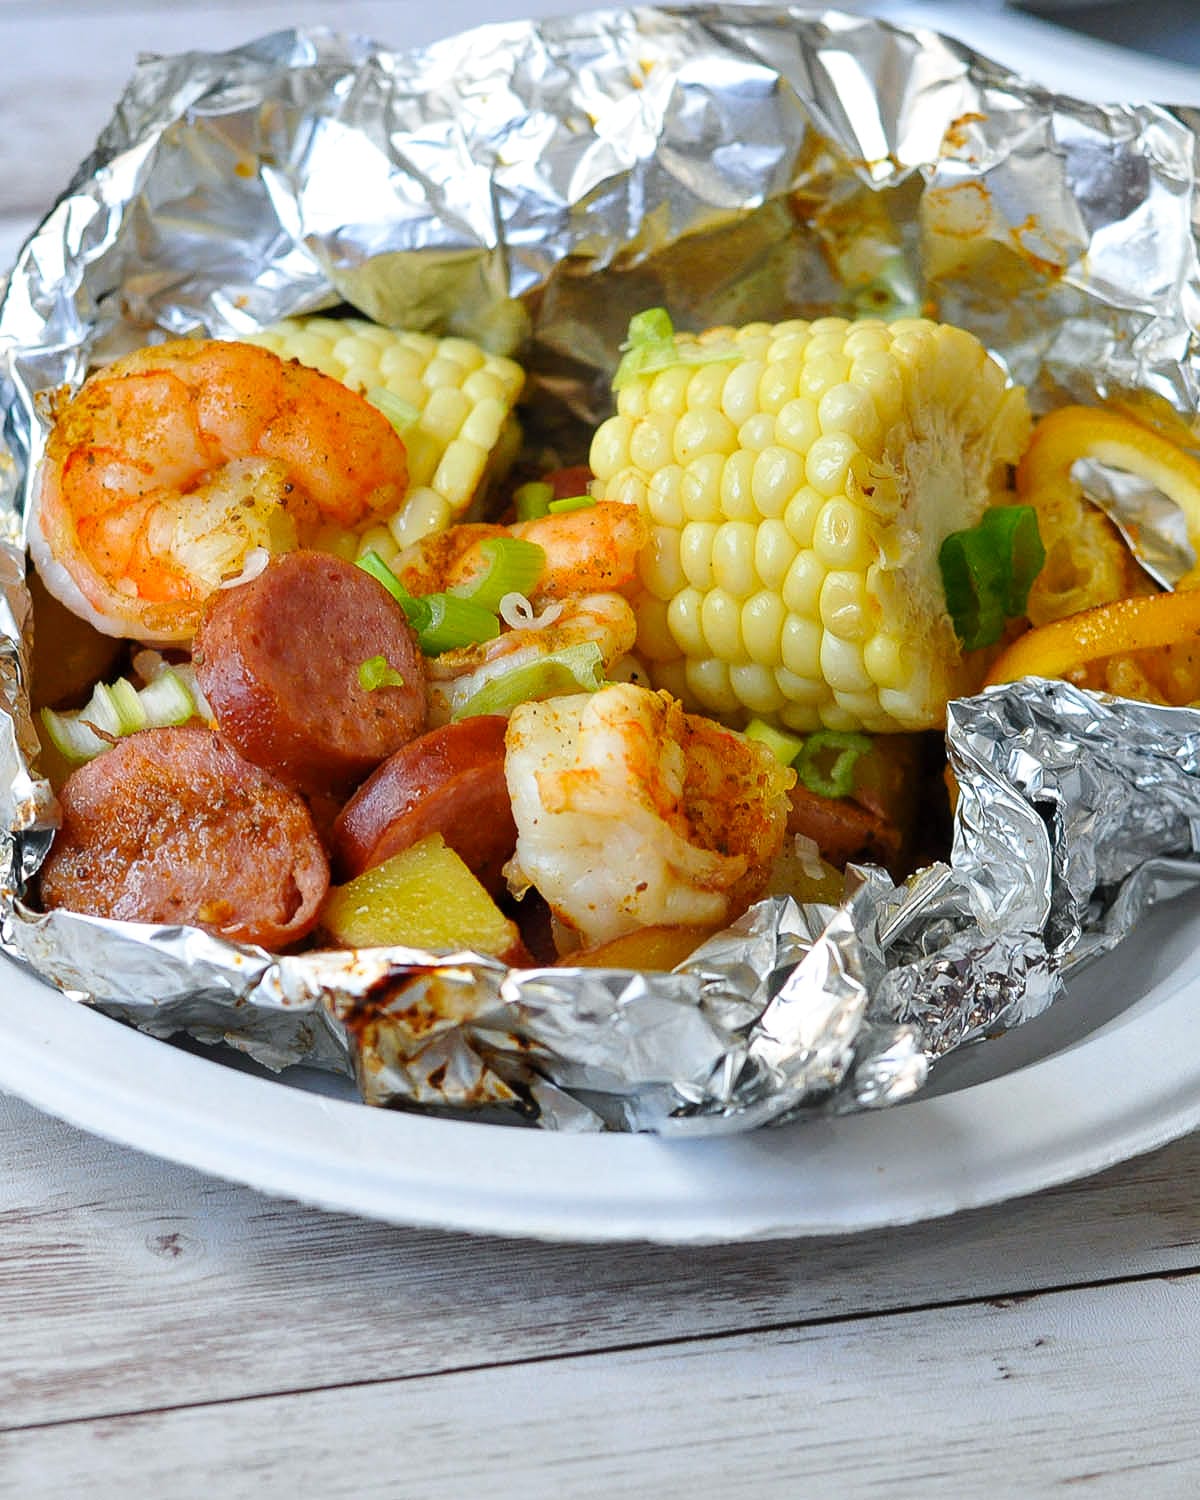 shrimp, sausage, corn, potatoes in foil ready to serve on a paper plate